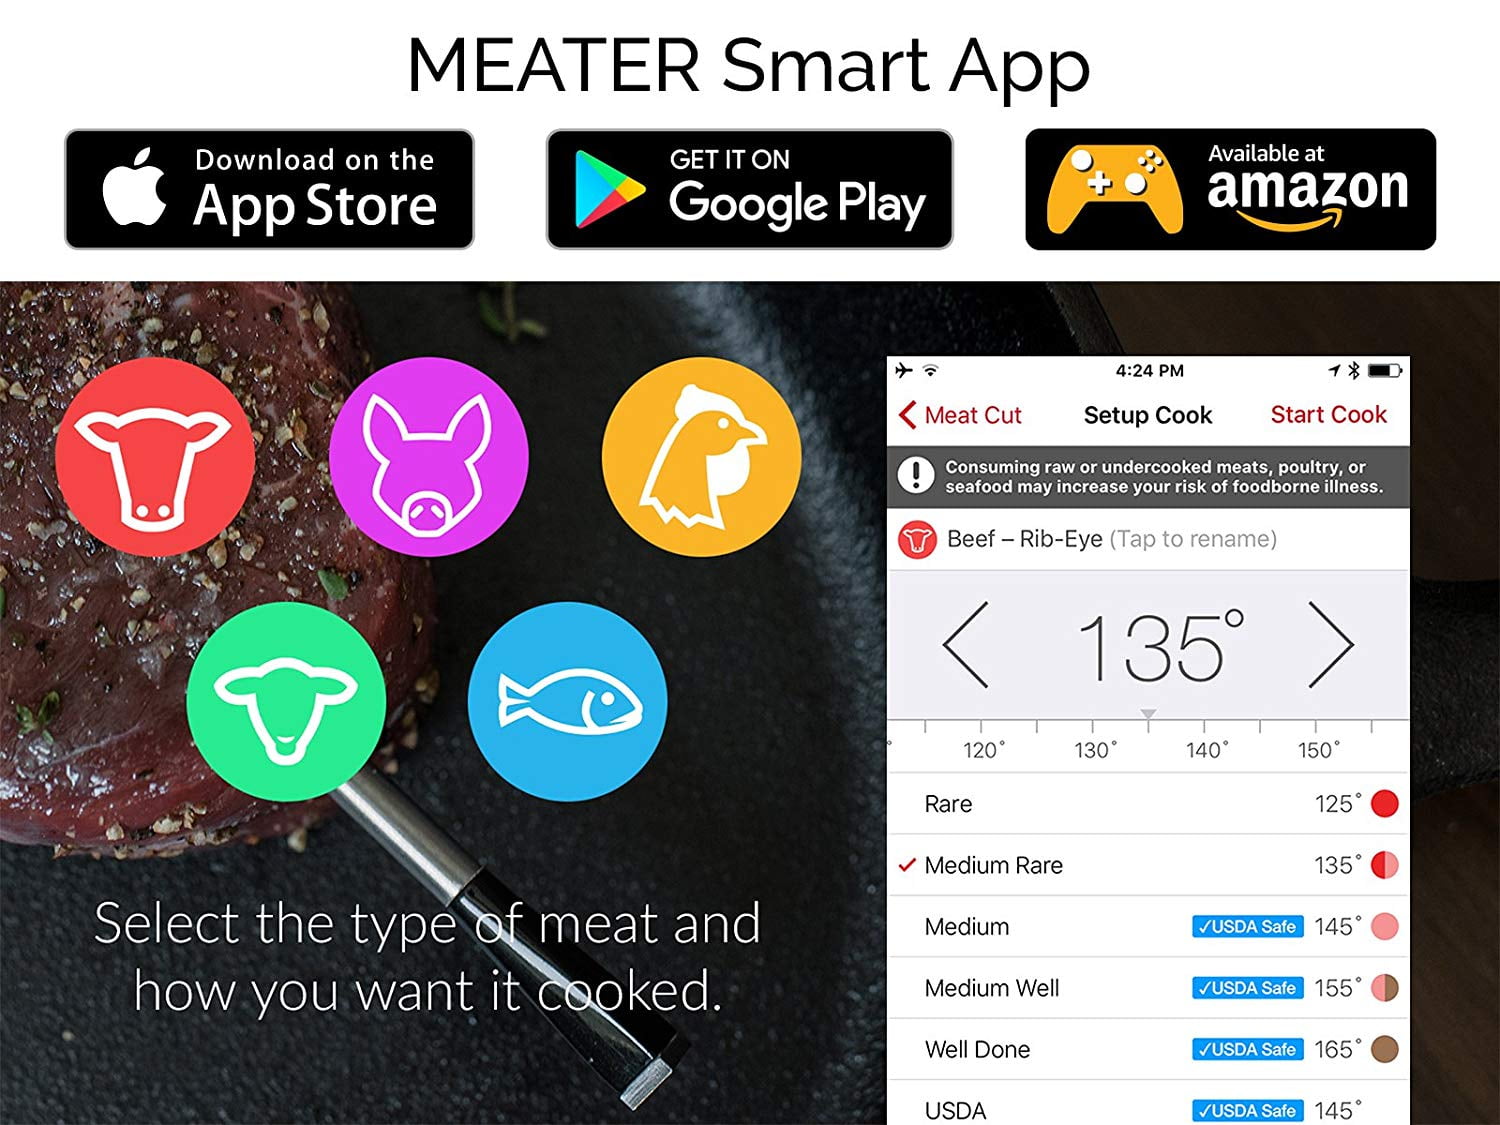  Original MEATER: Wireless Smart Meat Thermometer, 33ft  Wireless Range, for The Oven, Grill, BBQ, Kitchen, iOS & Android App, Apple Watch, Alexa Compatible